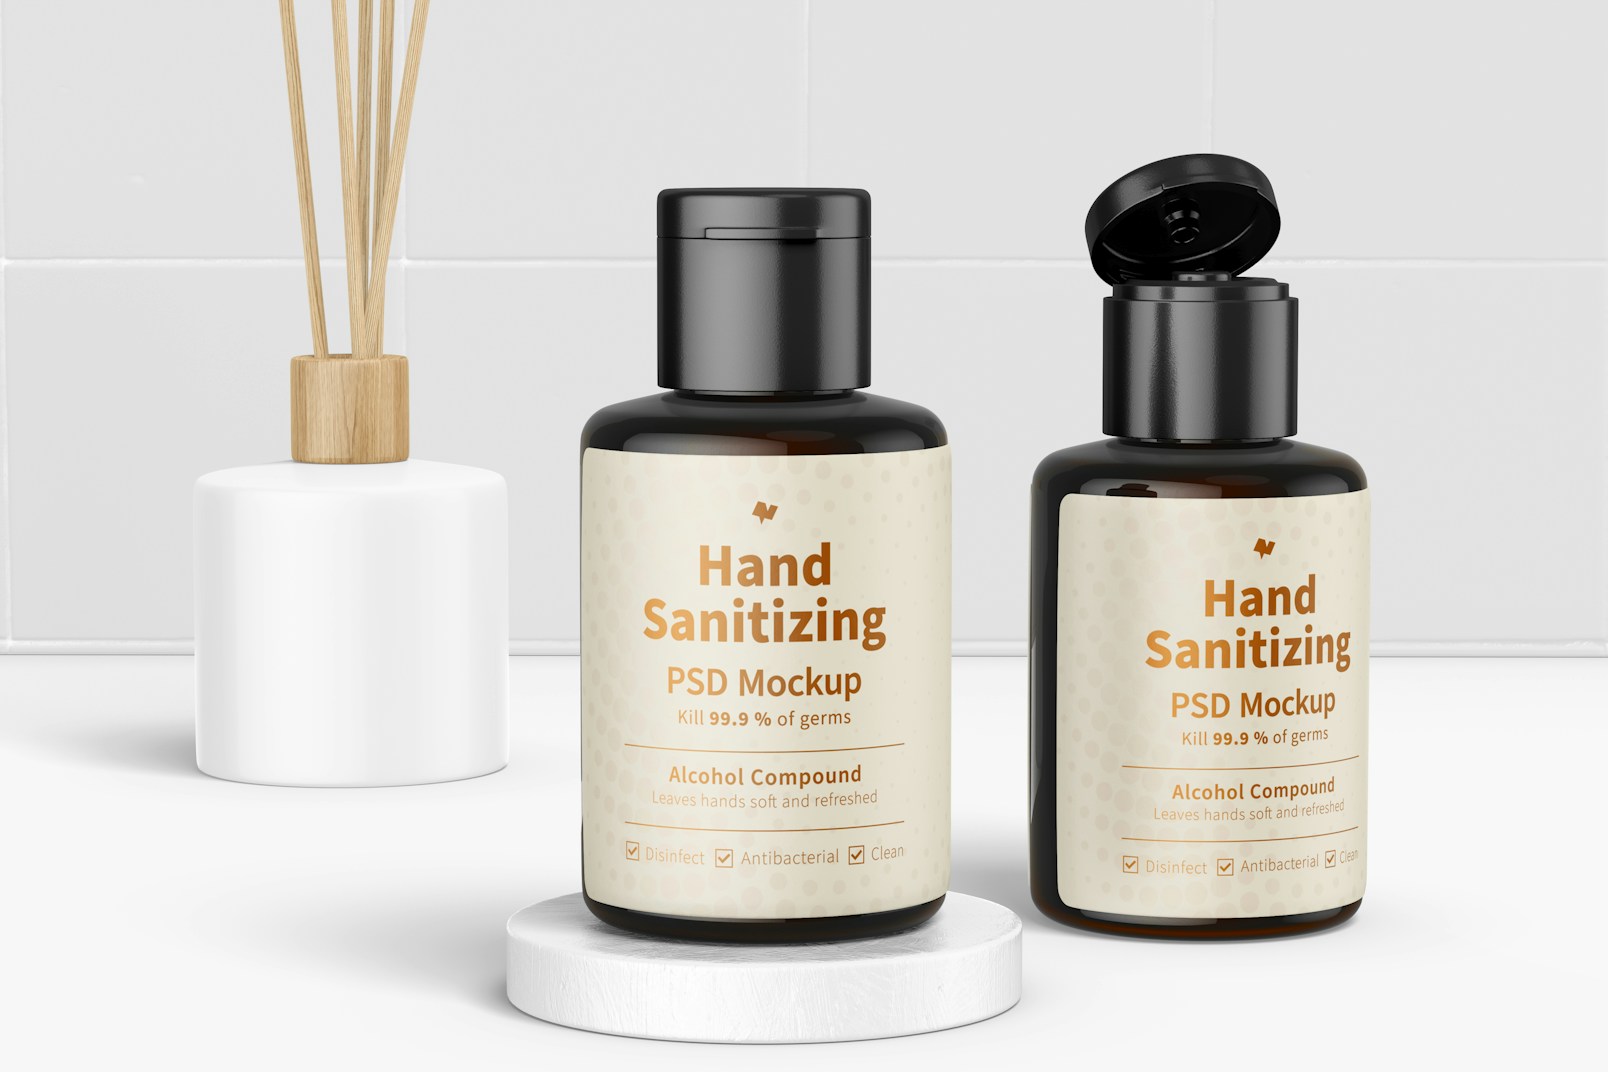 Portable Hand Sanitizing Gels with Label Mockup